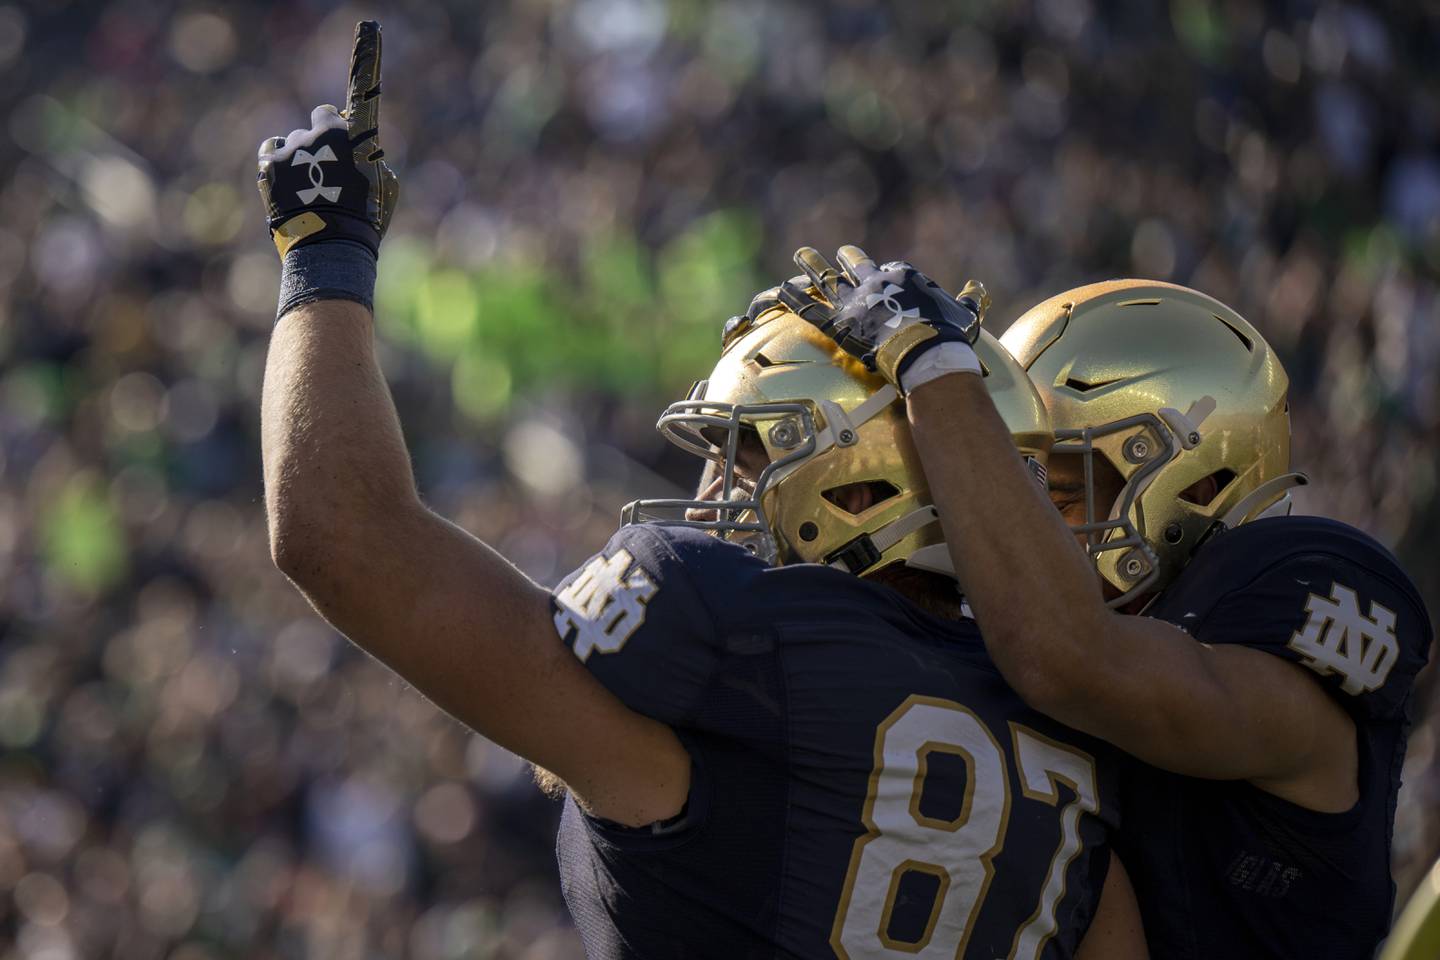 Notre Dame tight end Michael Mayer, left, celebrates a touchdown reception with wide receiver Braden Lenzy during the first quarter against UNLV on Saturday in South Bend, Ind.